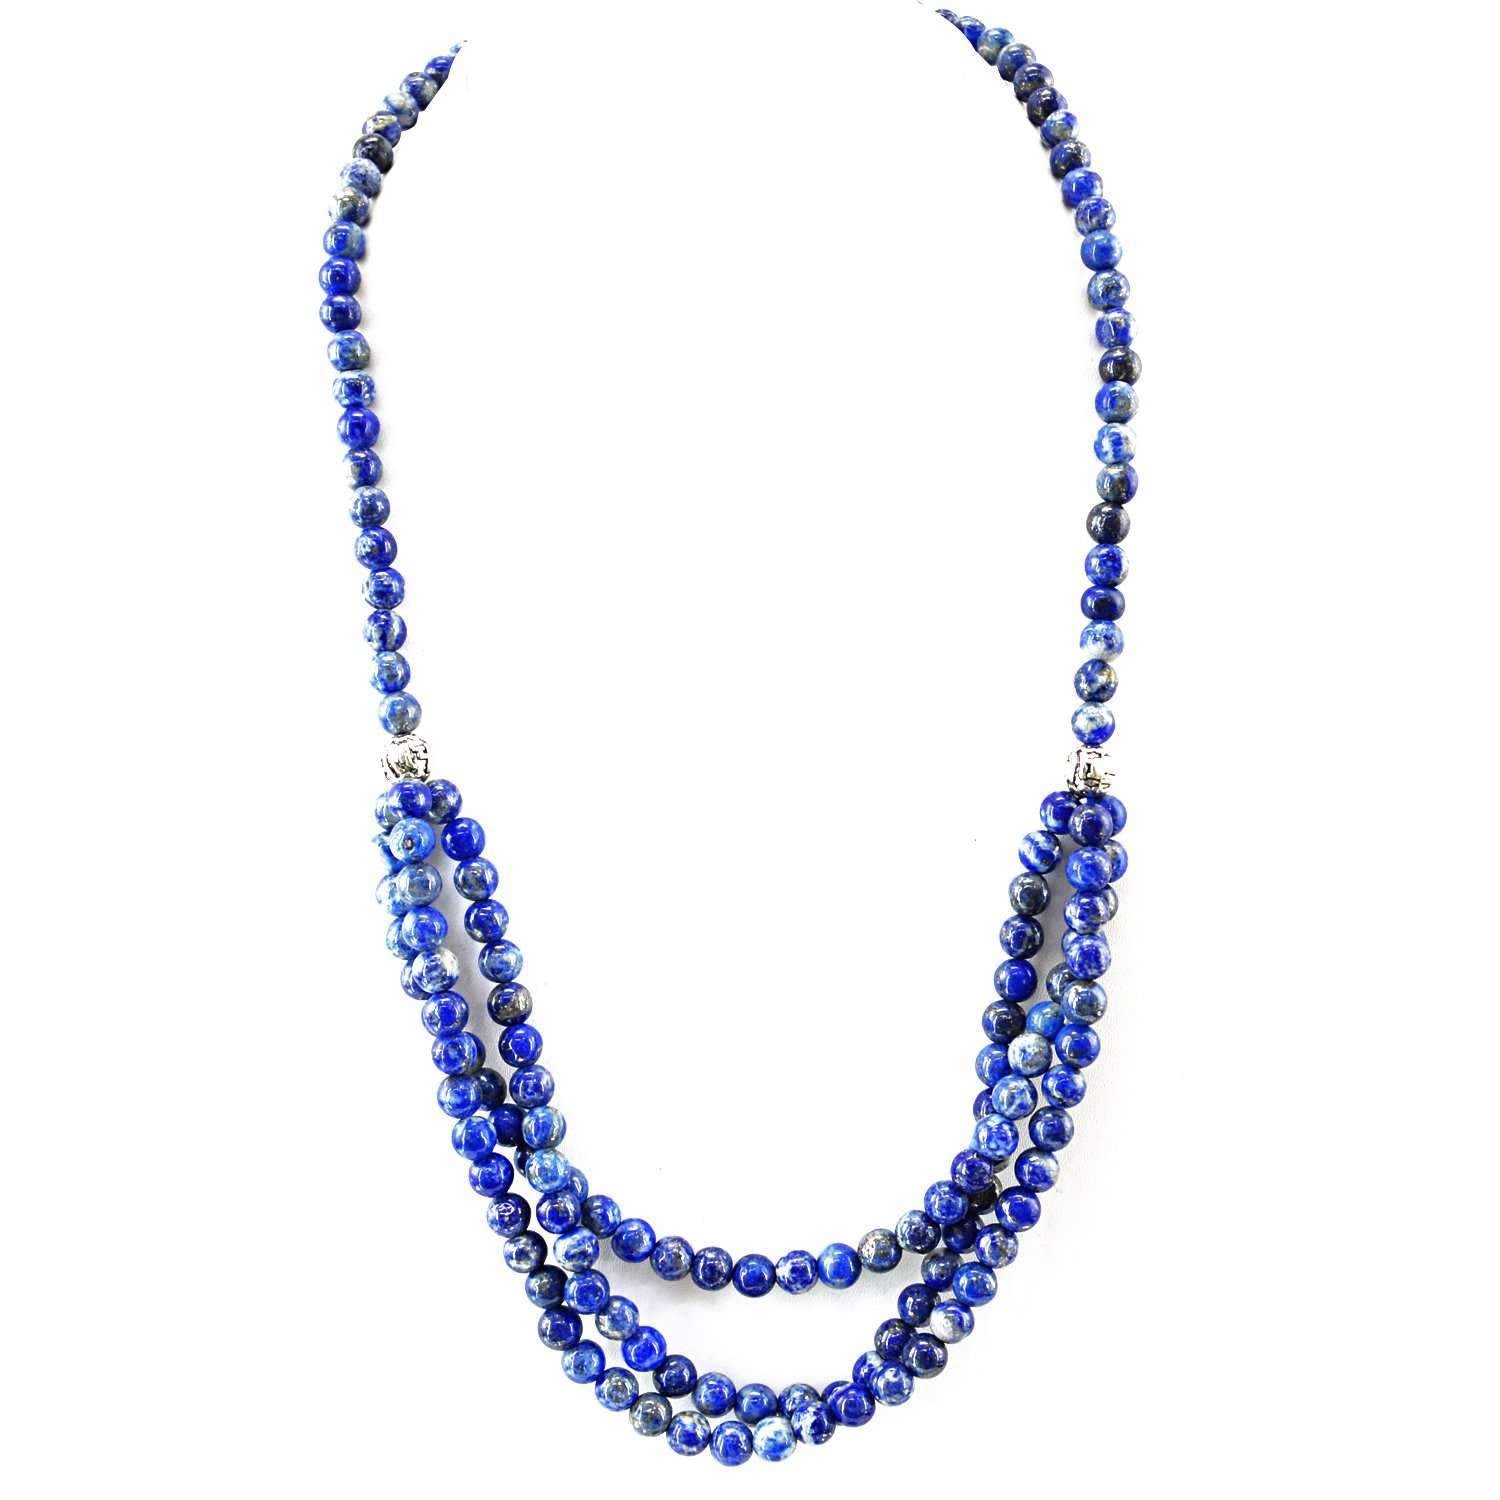 gemsmore:Blue Lapis Lazuli Necklace 20 Inches Long Natural Round Beads